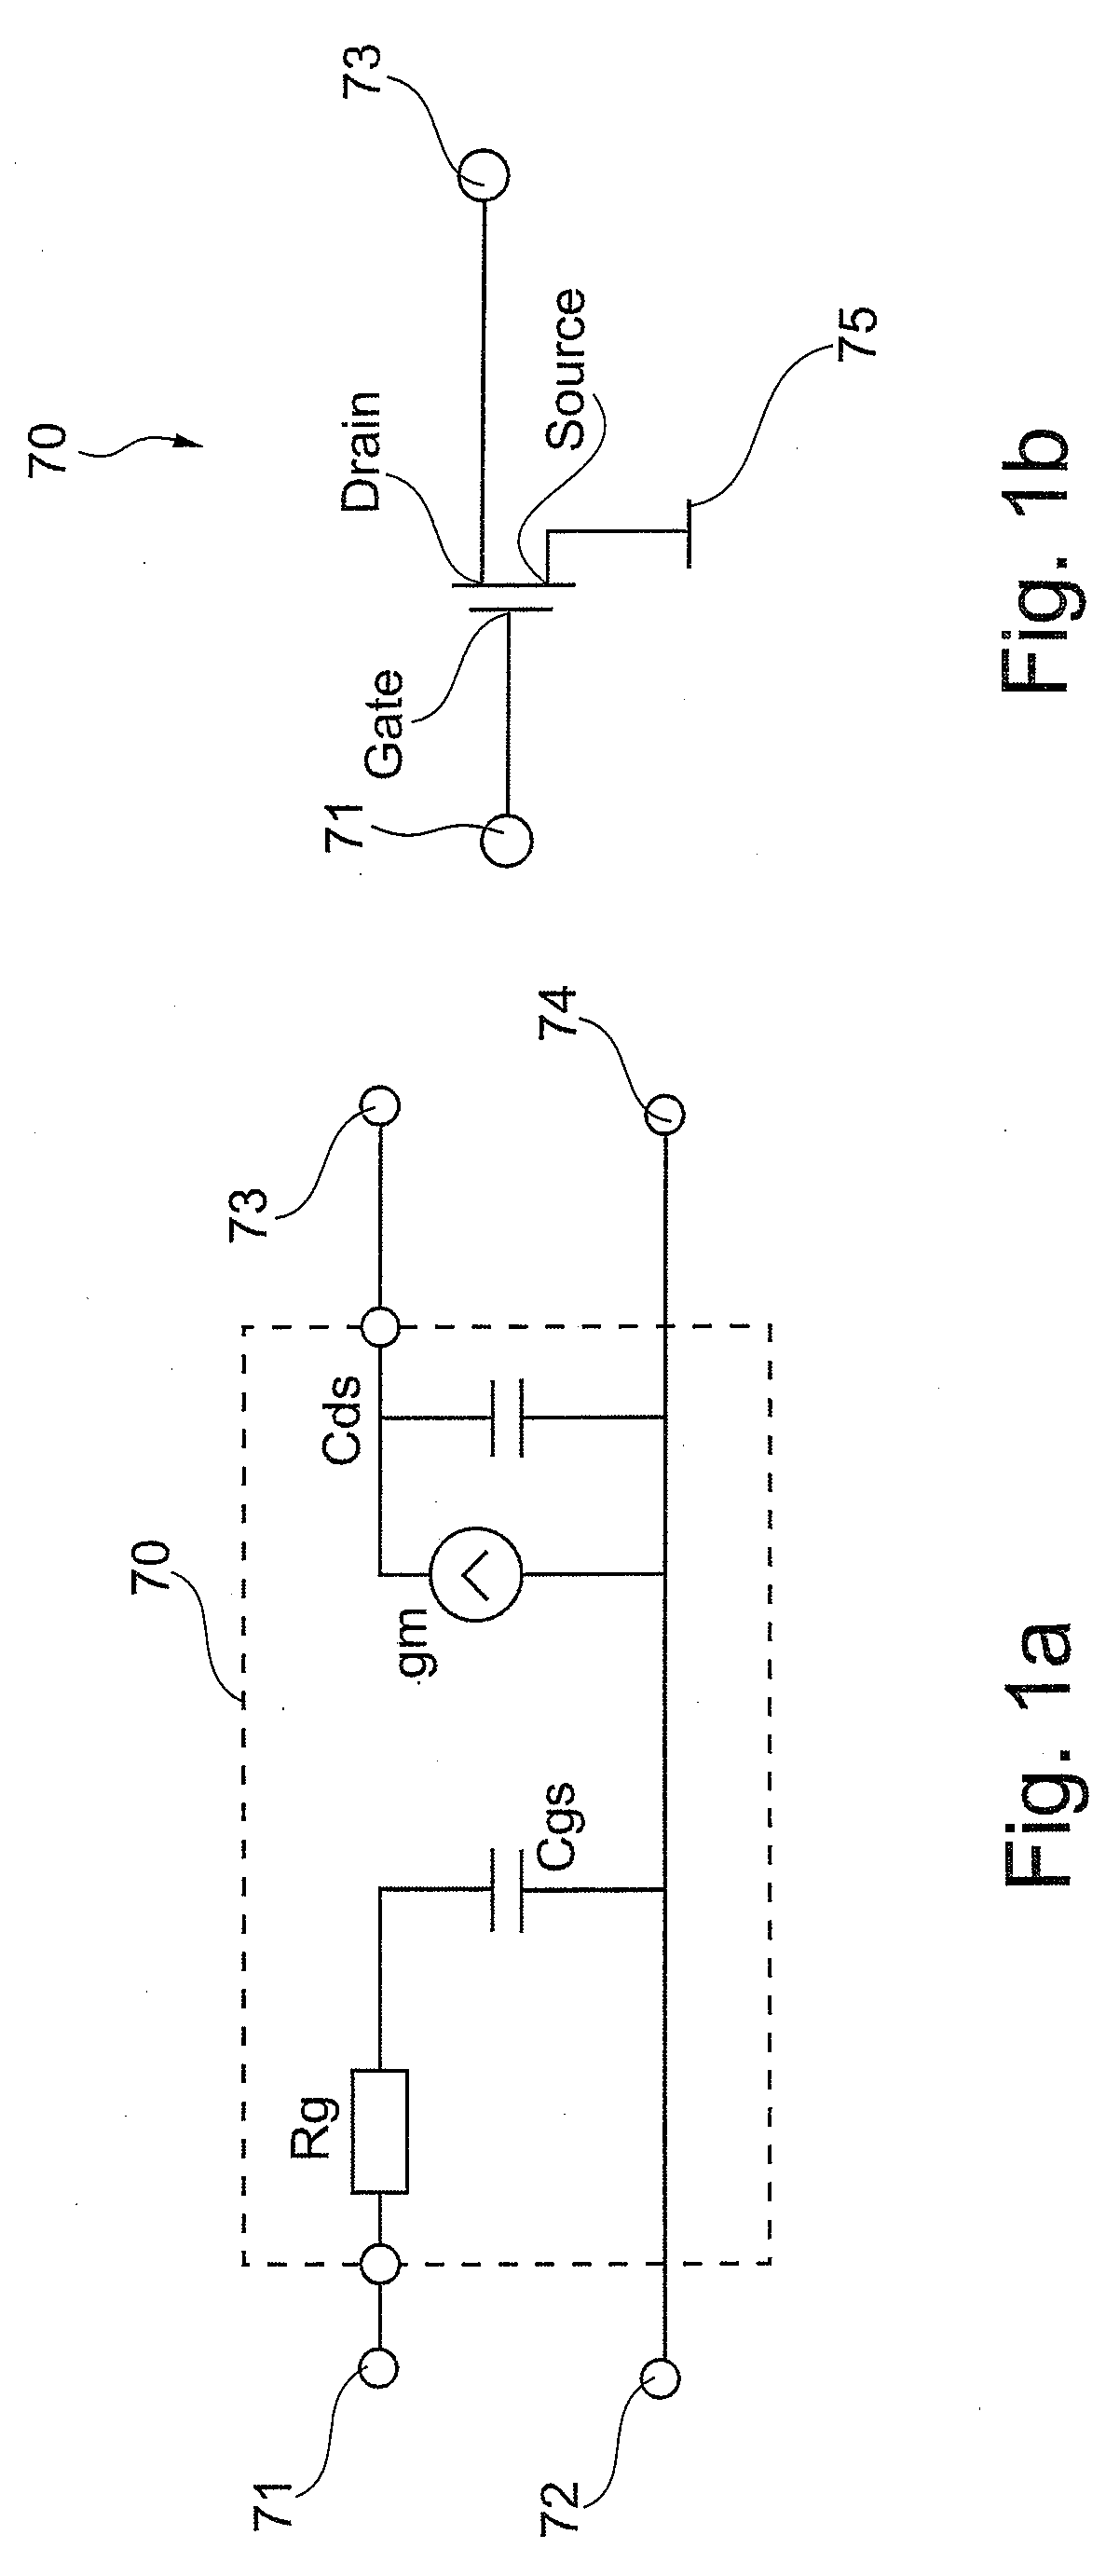 Doherty amplifier with composed transfer characteristic having multiple peak amplifiers